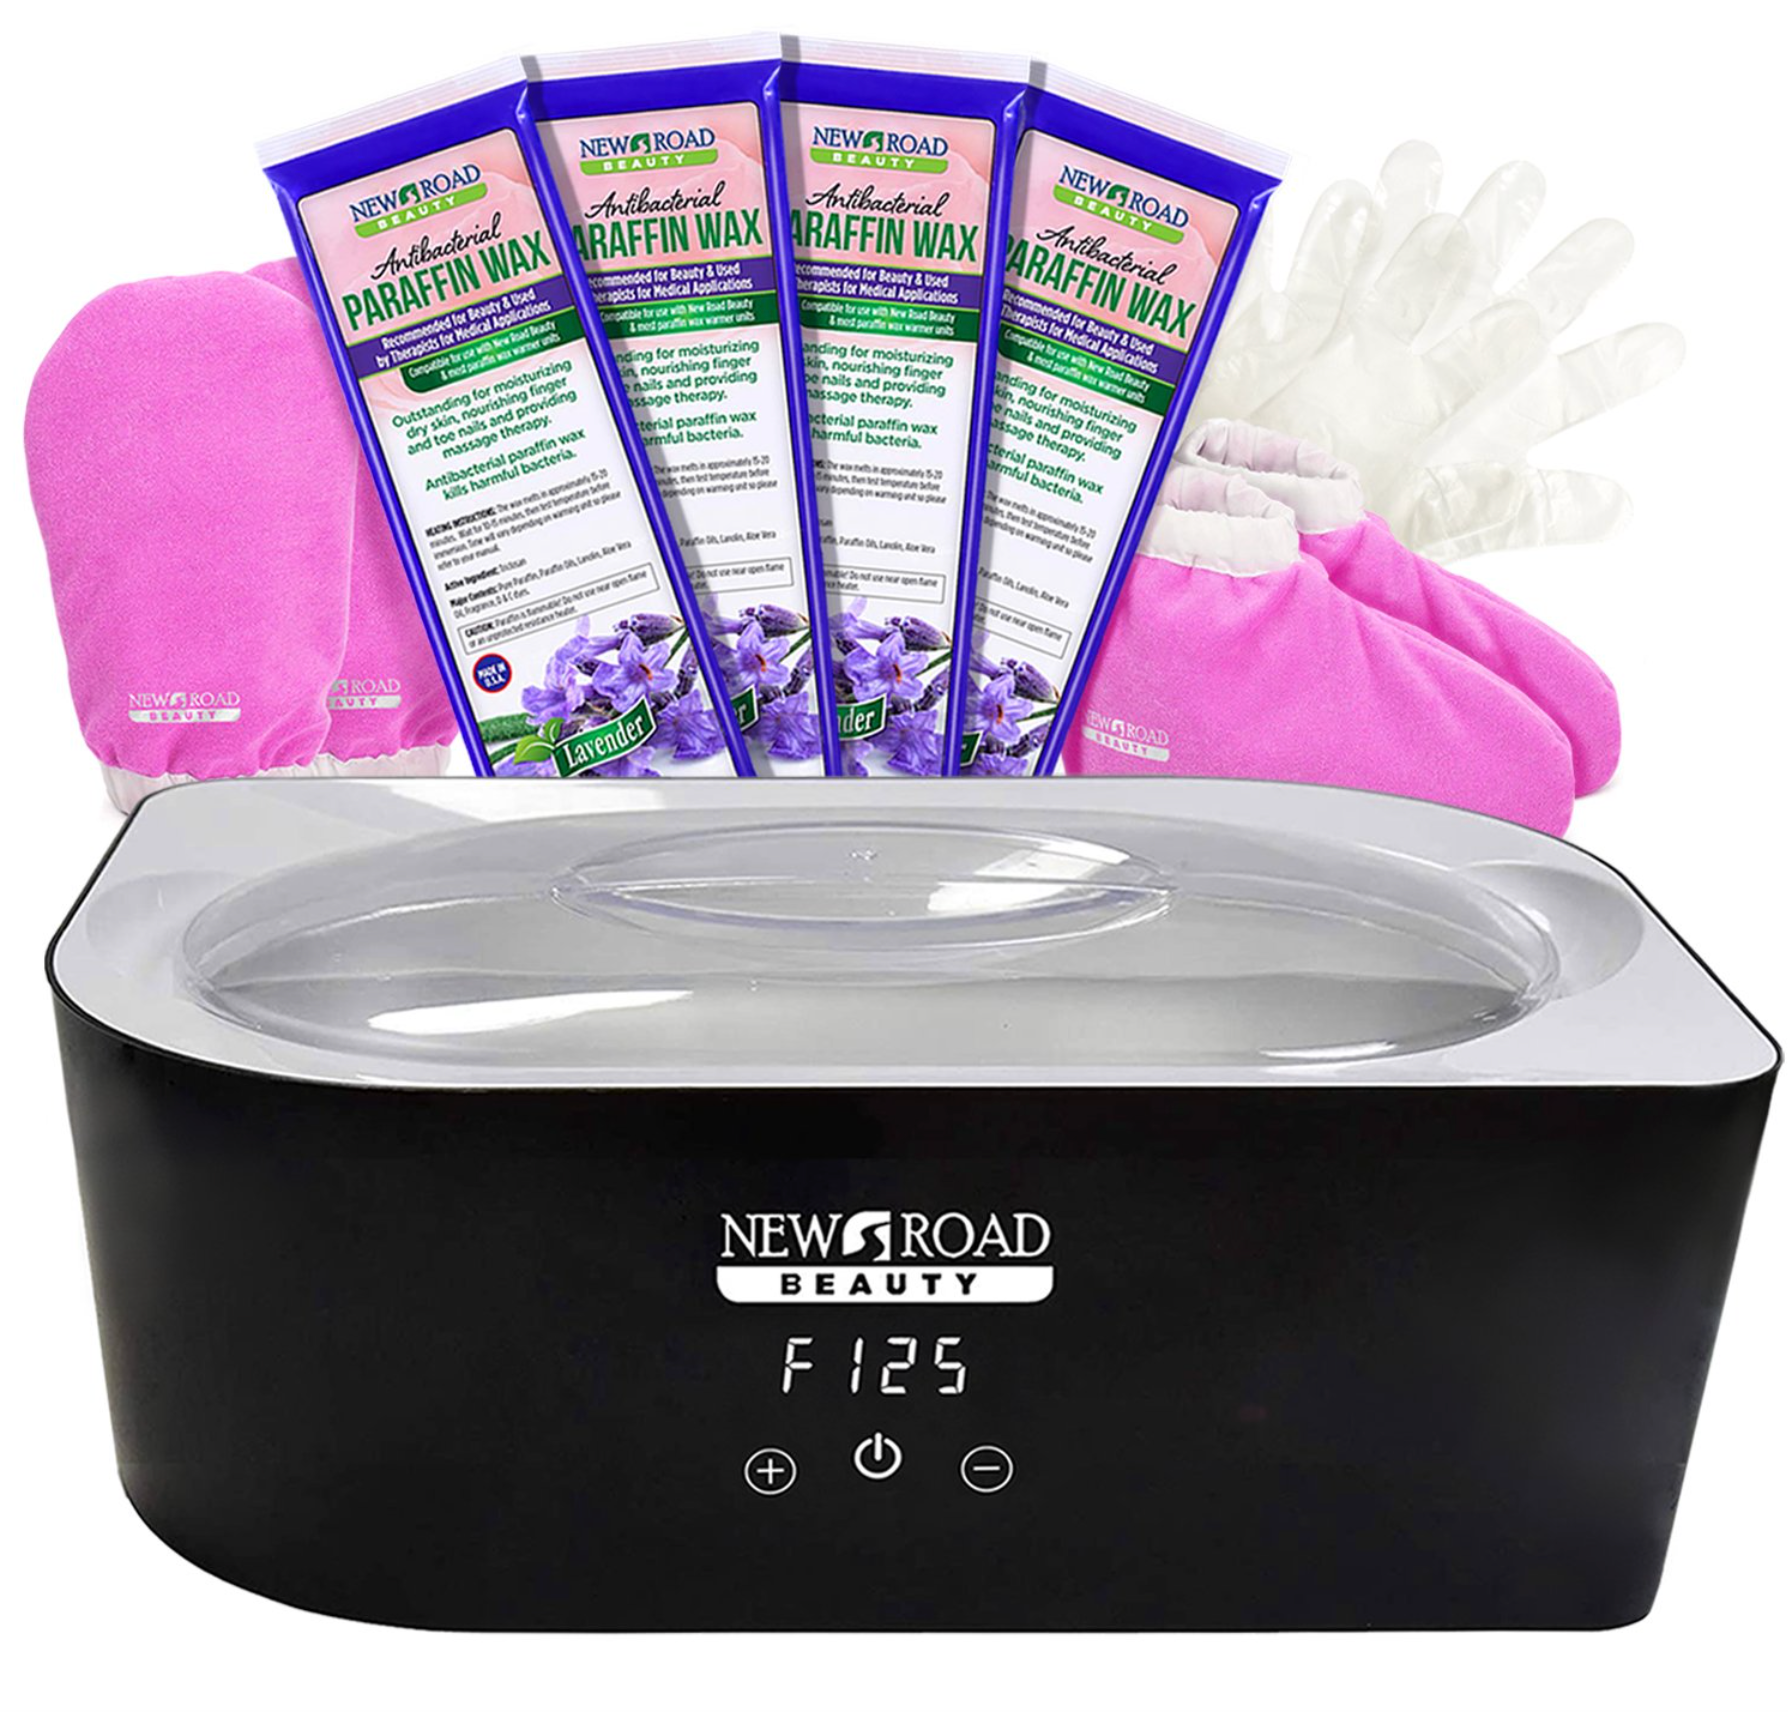 The Best Present for Her: The Paraffin Wax Holiday Gift Kit